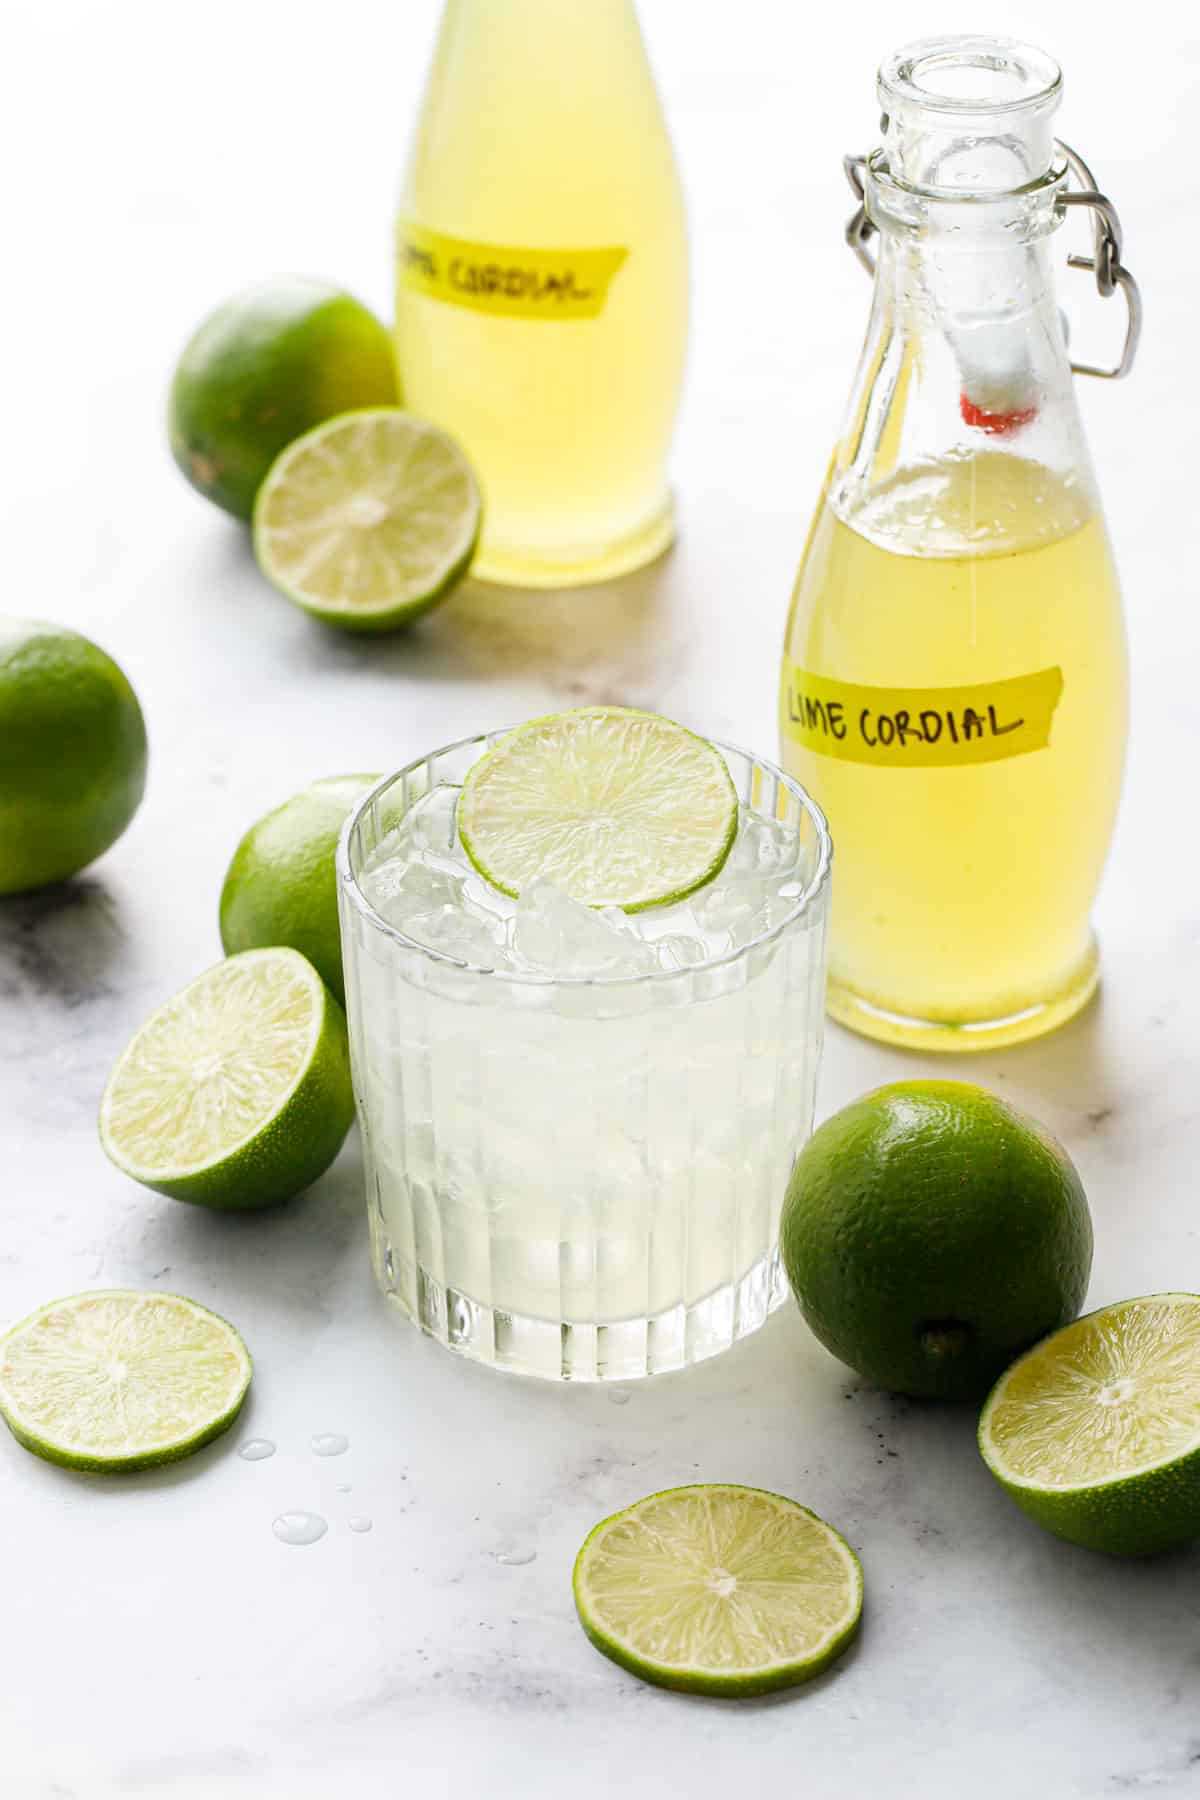 Lime Gimlet cocktail in an ice-filled lowball glass, with bottles of Homemade Lime Cordial and fresh limes scattered around.